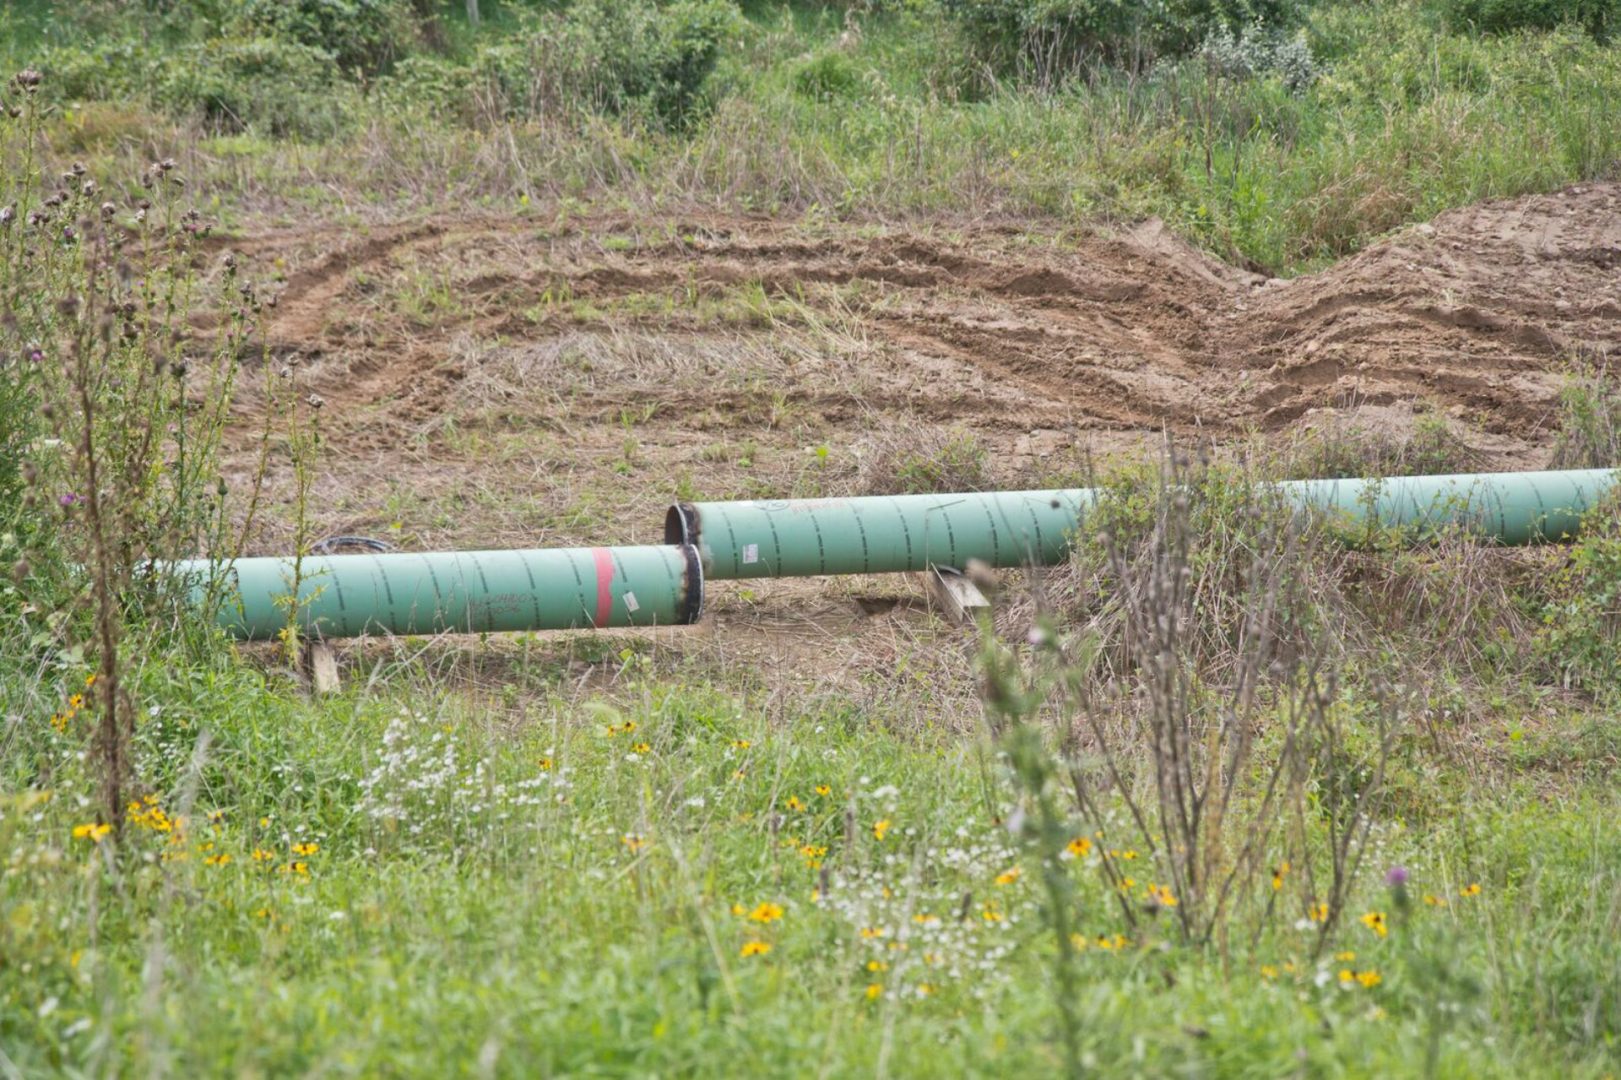 A Mariner East 2 pipeline construction  site is shown off Valley Road near Media, Pa., on Aug. 22. The site is close to where Sunoco is digging up a section of the pipeline after discovering a coating issue that needed to be fixed. 